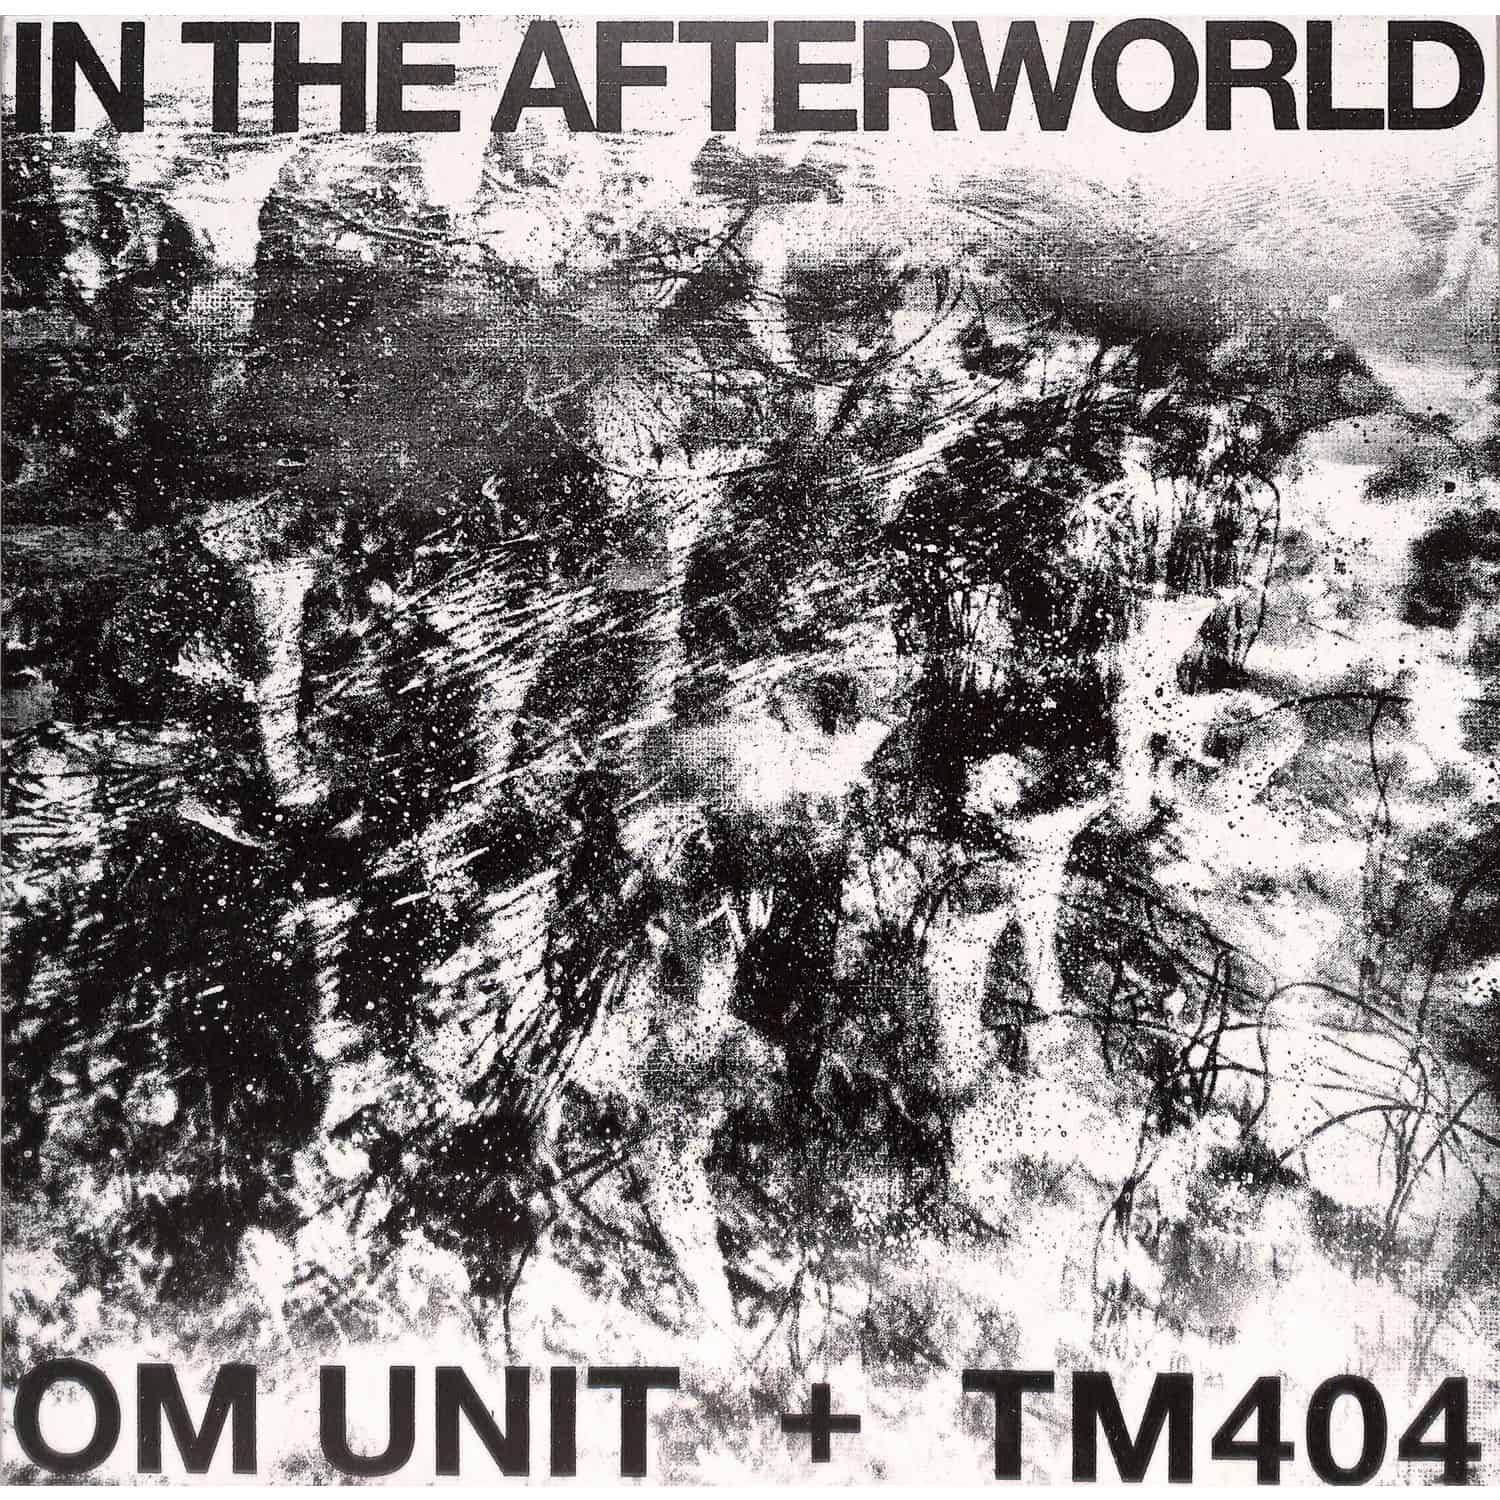 Om Unit + TM404 - IN THE AFTERWORLD 